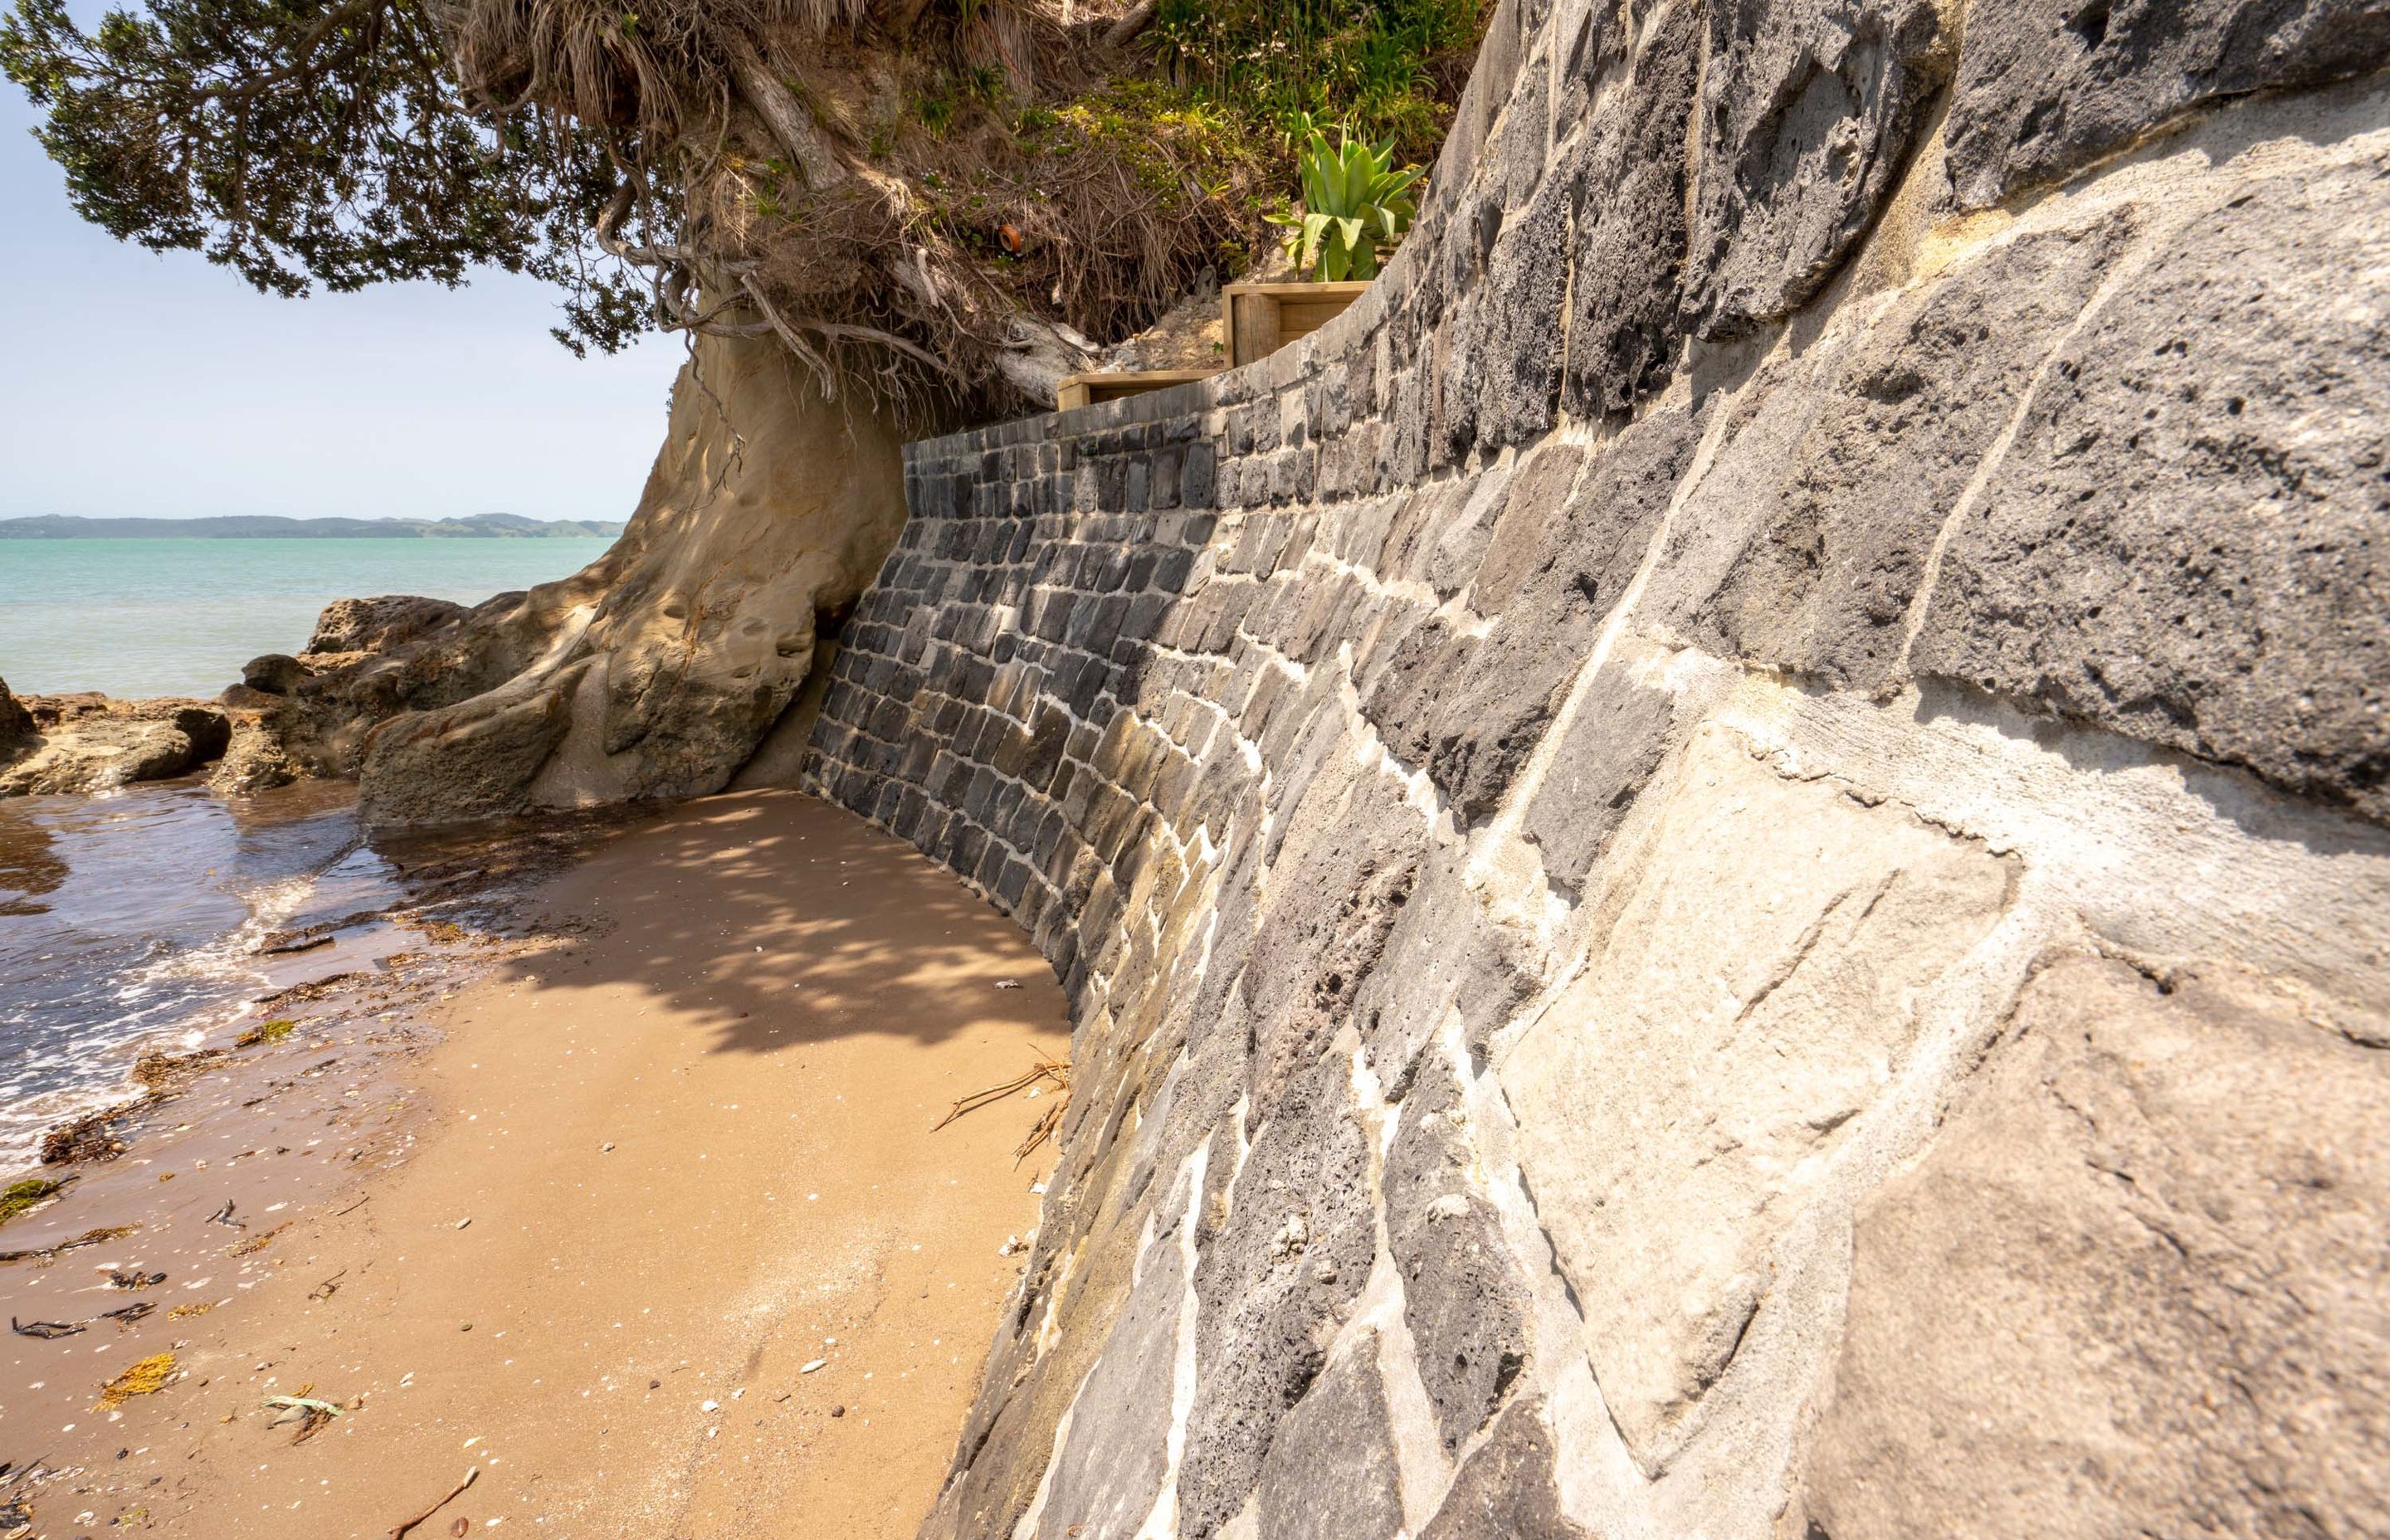 Sea walls are an effective way of stopping erosion and damage for both residential and civil settings.